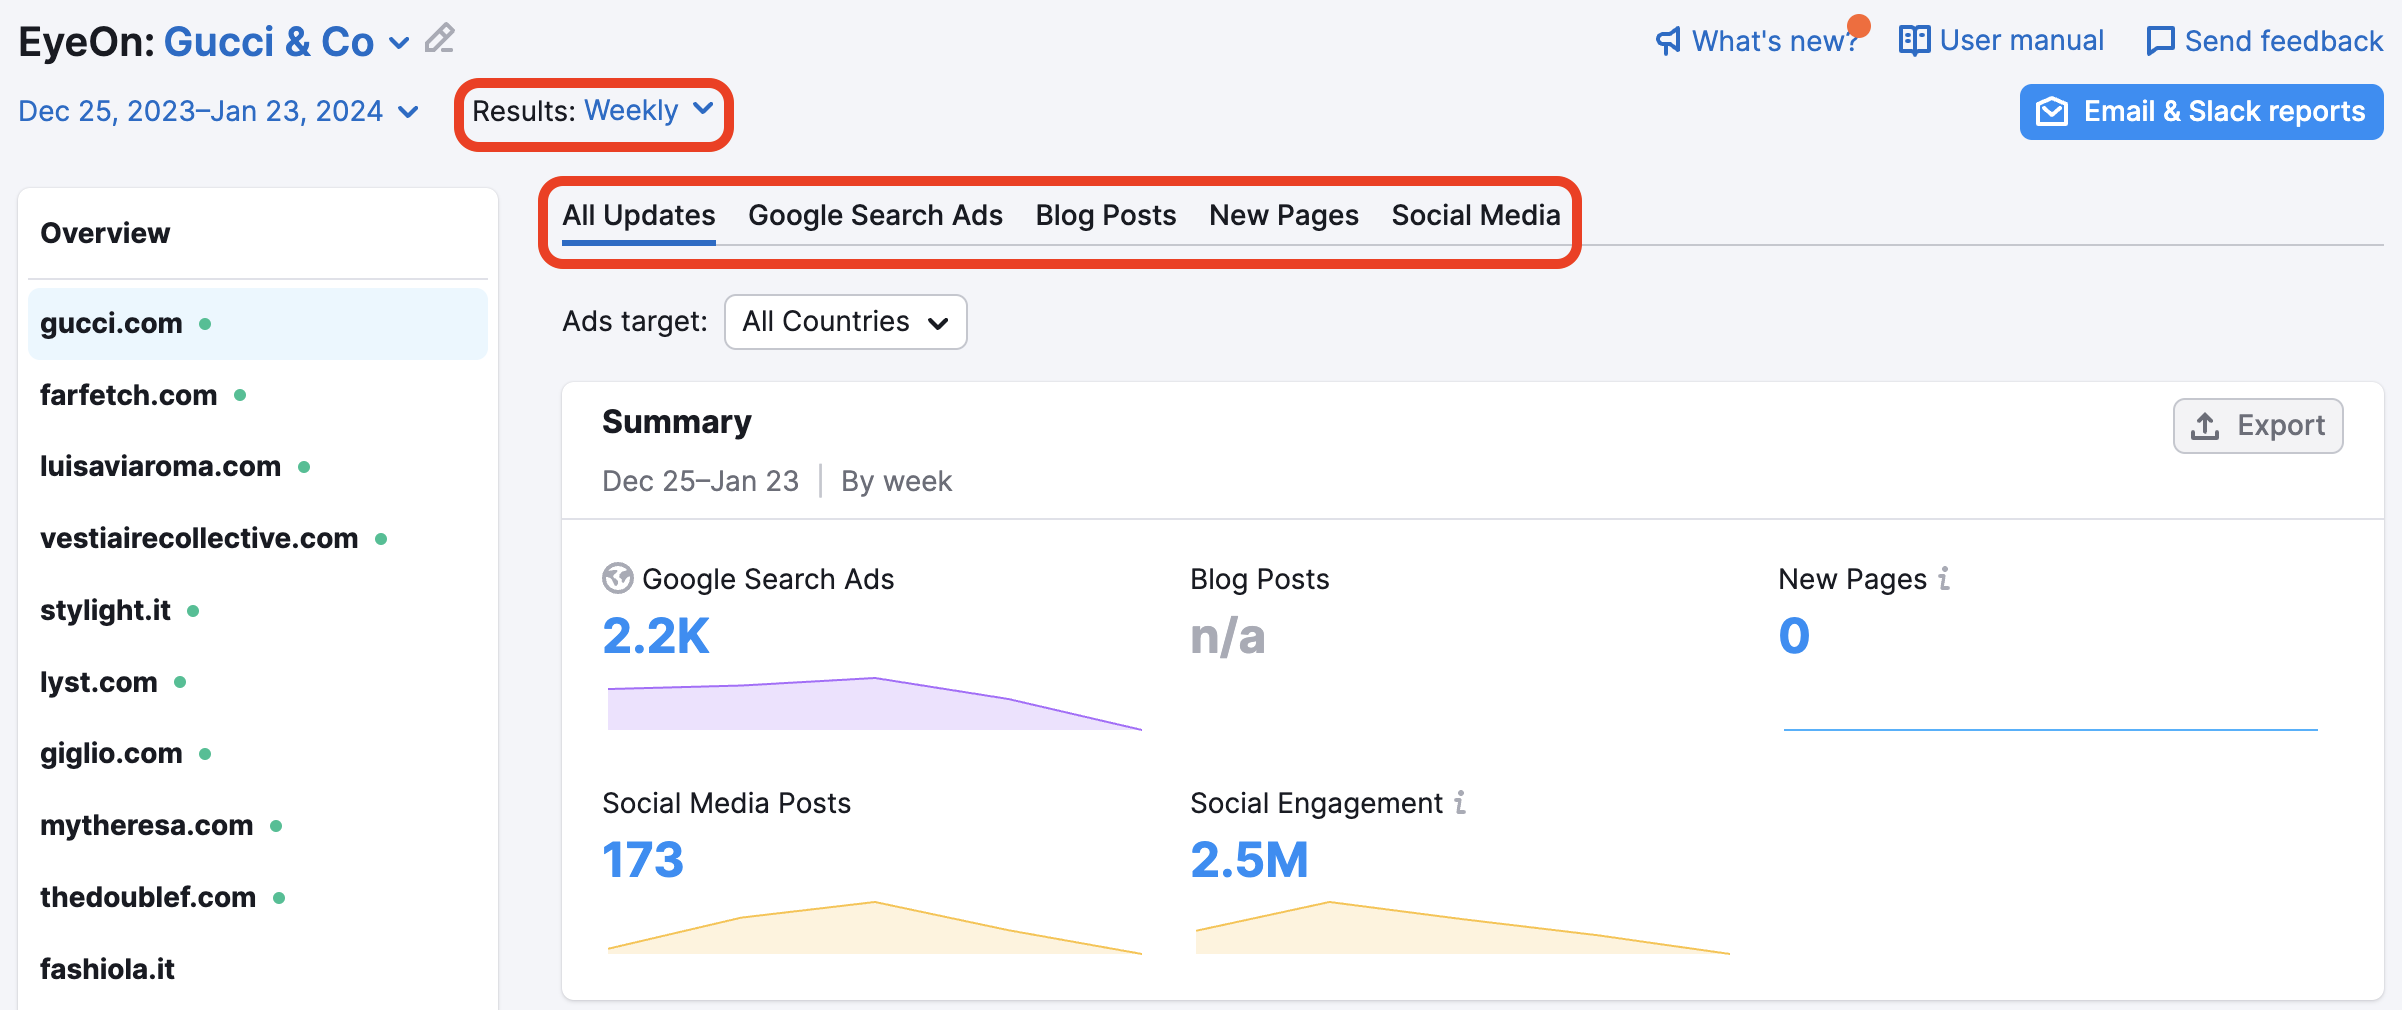 EyeOn example report with two main sorting options highlighted. The first option is by time period of results, for example, by Day or by Week, the second one is by source of data, such as Blog Posts or Social Media.